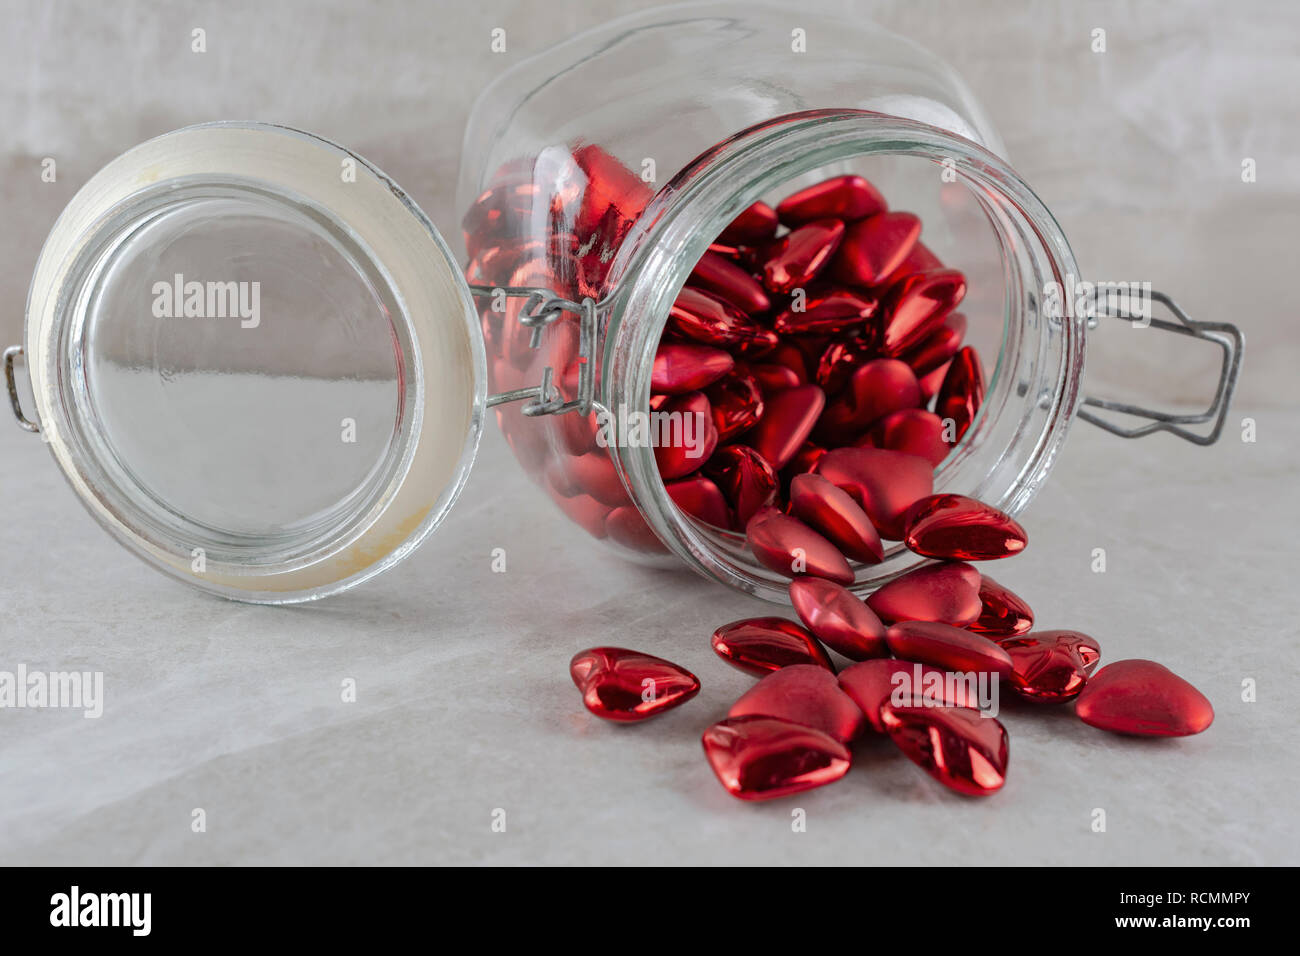 Spilled jar of red hearts on its side.  Tan background. Stock Photo